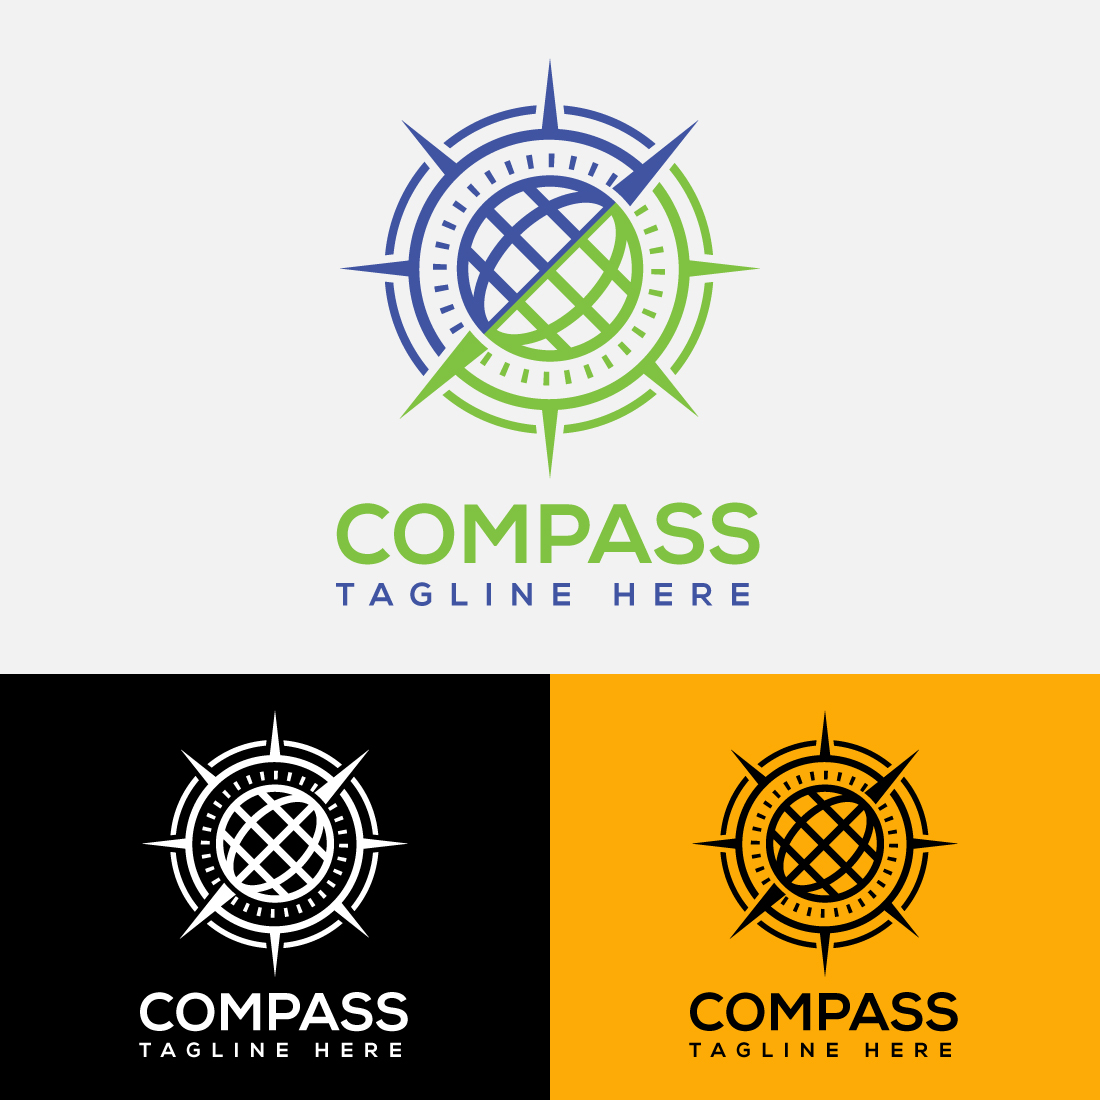 Pack of images of amazing round logos in the form of a compass.